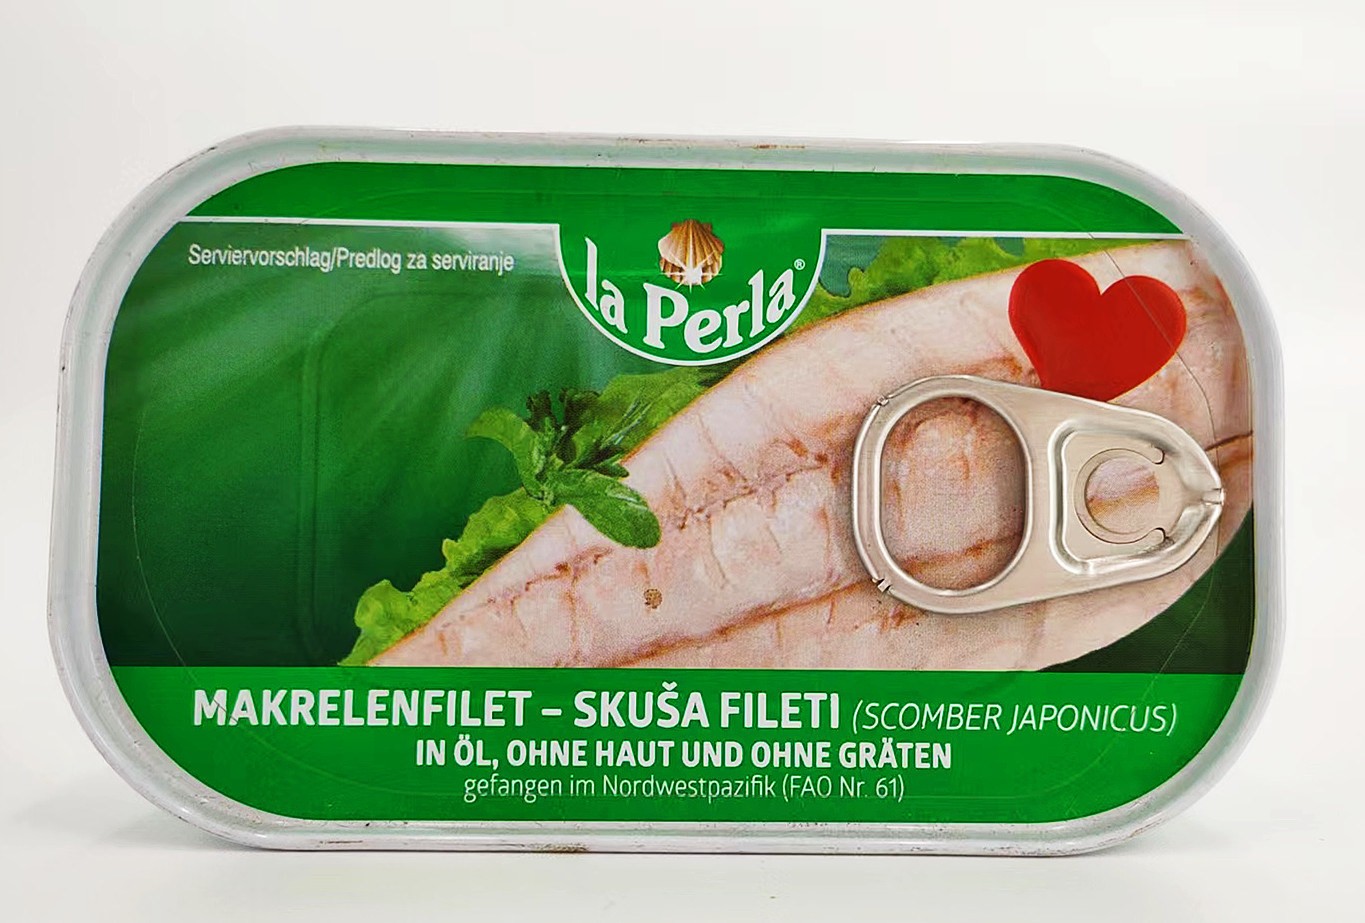 Canned Sardines in High-Quality Low-Cost Sardine Oil